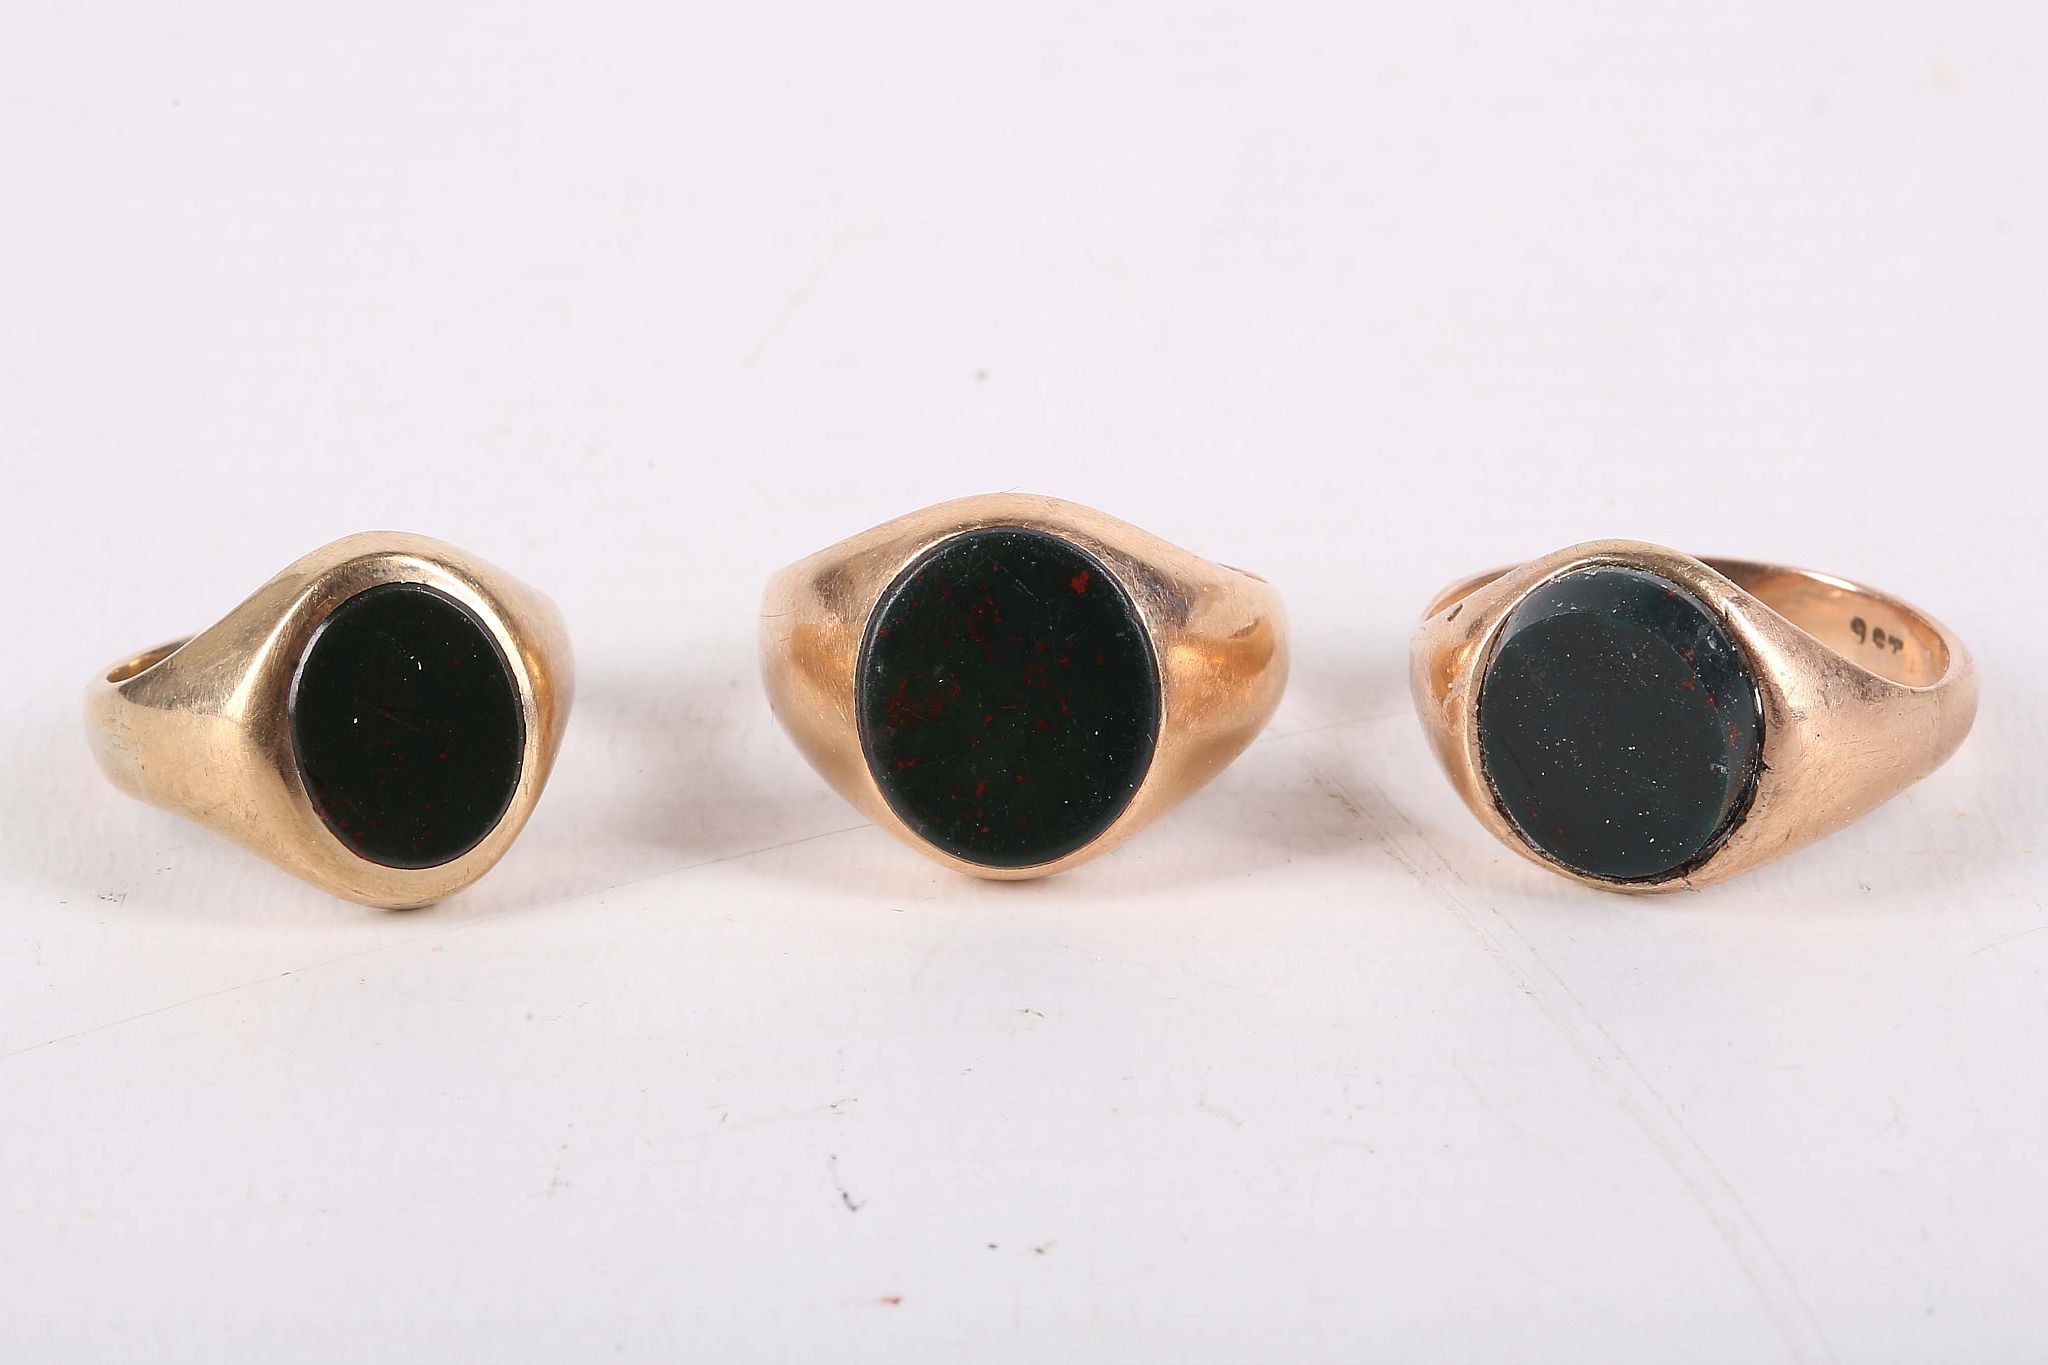 Three late 19th / early 20th century bloodstone signet rings. UK hallmarks for 9 and 15 carat yellow